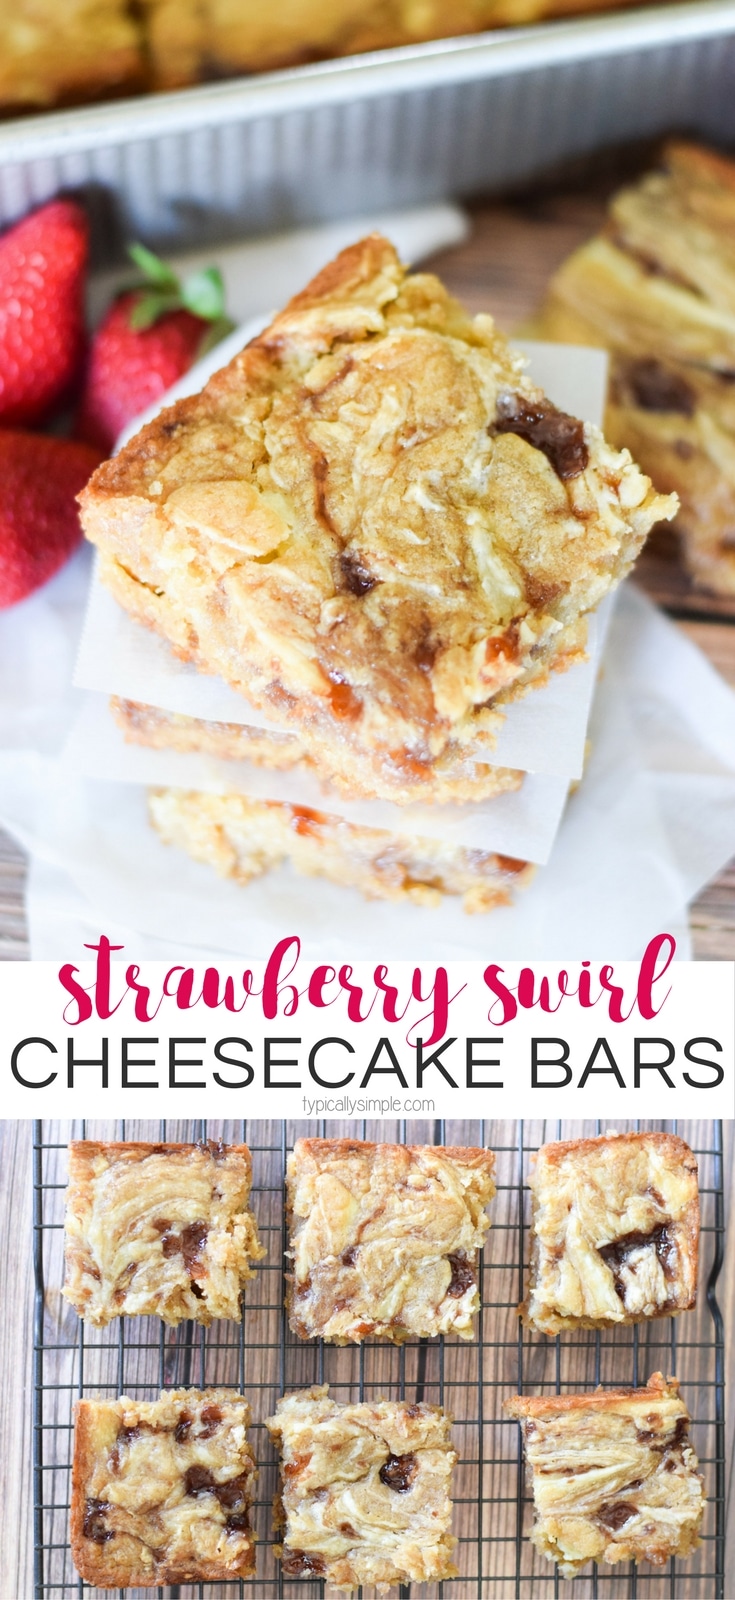 These strawberry swirl cheesecake blondie bars are a decadent treat and quite easy to make. With some basic baking ingredients and a few minutes of prep, this will quickly become your new go-to dessert to make for parties!